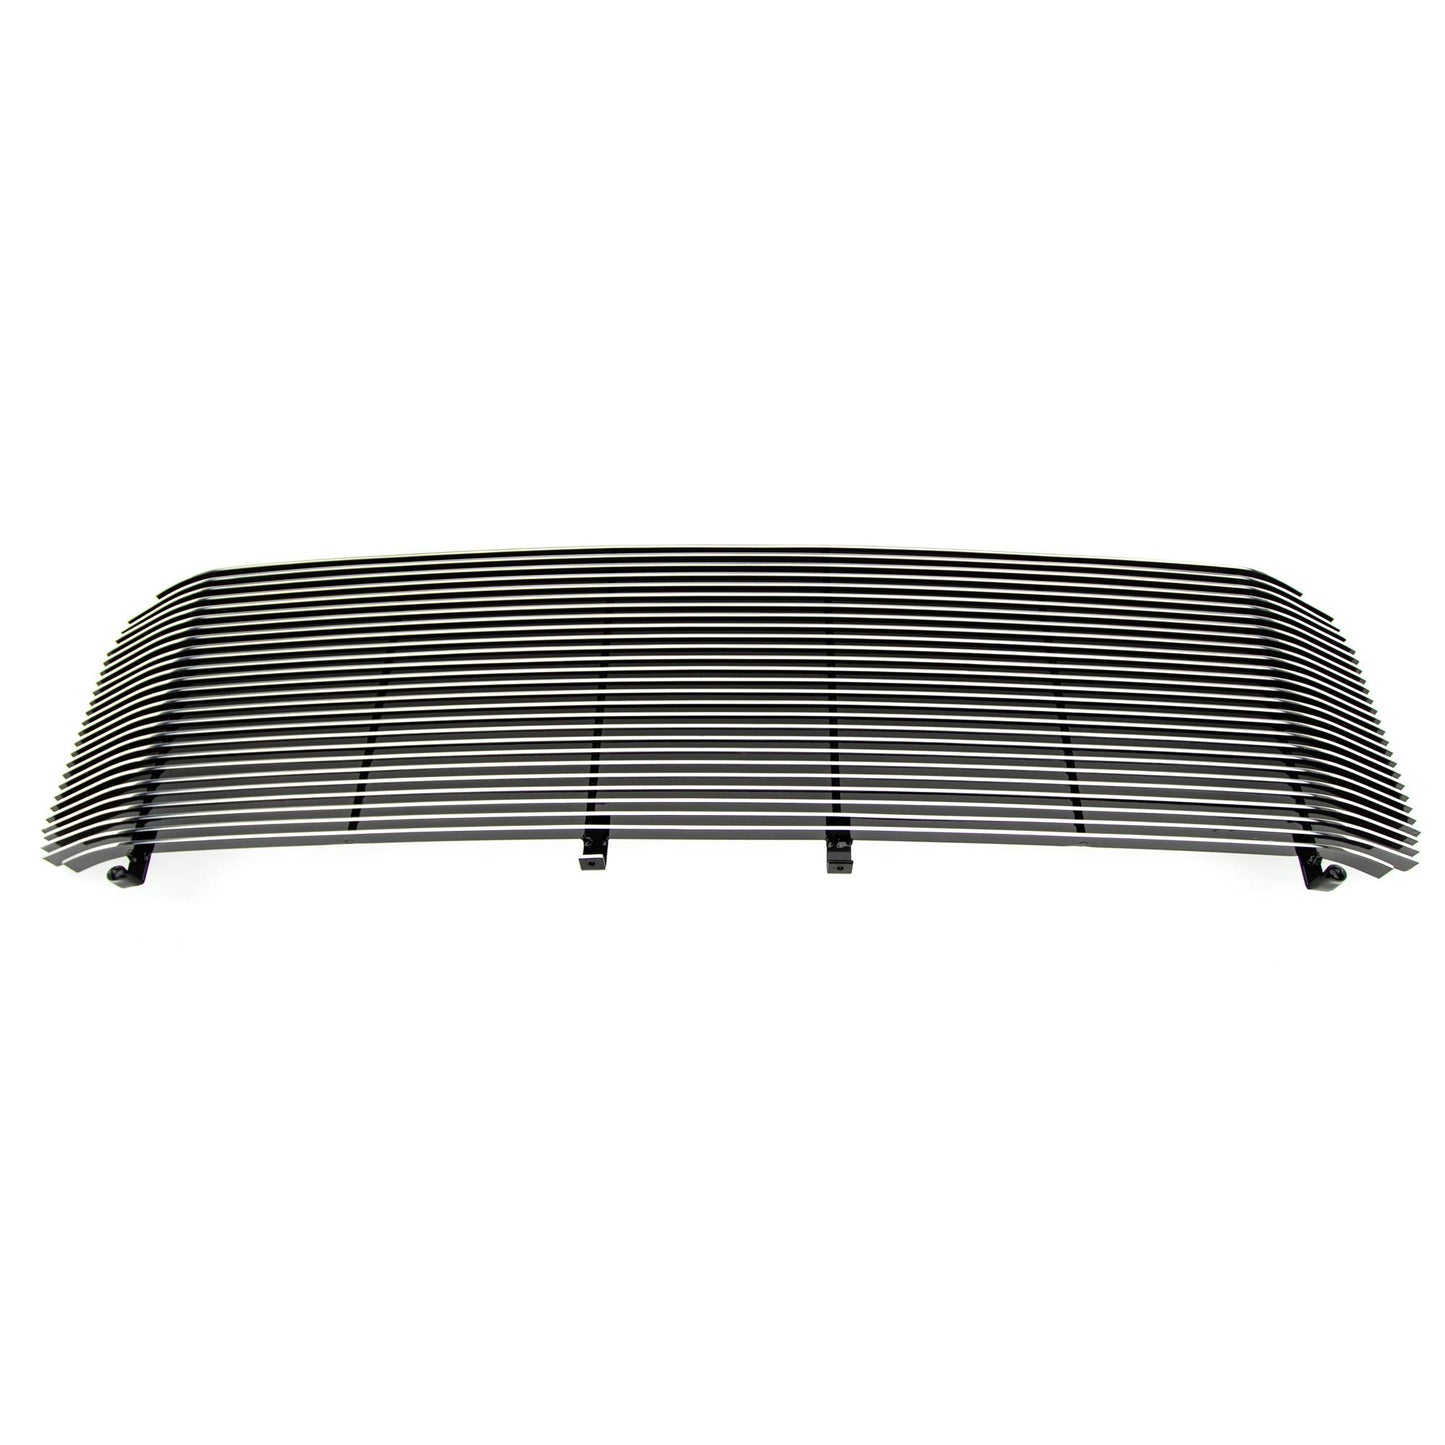 T-REX Grilles 20574 Polished Aluminum Horizontal Grille Fits 2000-2004 Ford Excursion